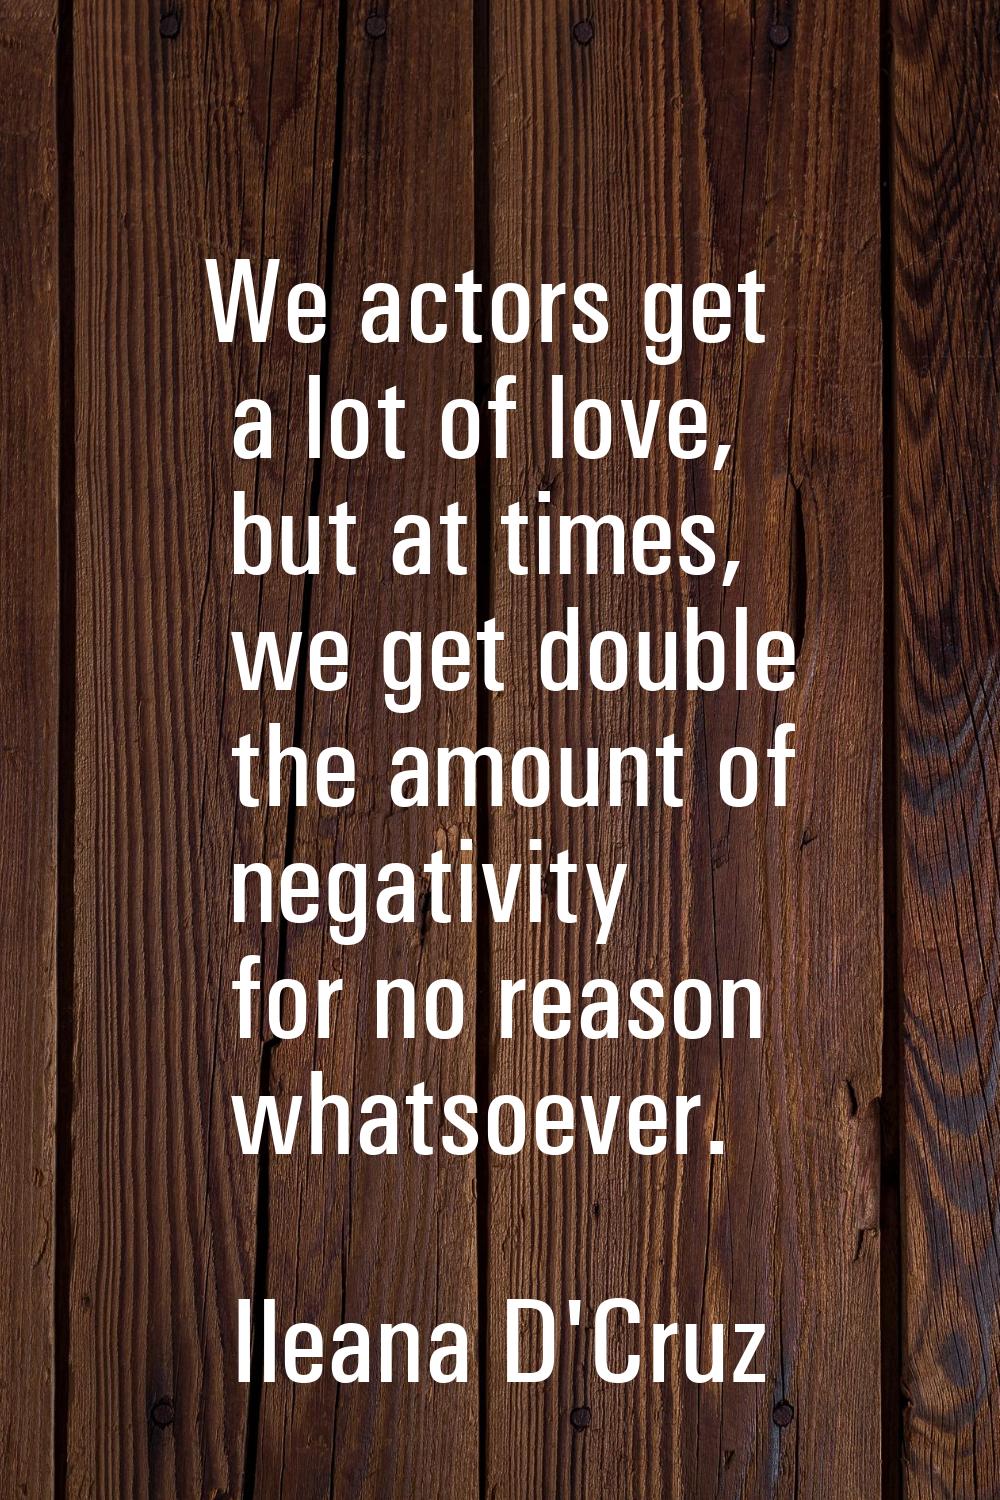 We actors get a lot of love, but at times, we get double the amount of negativity for no reason wha